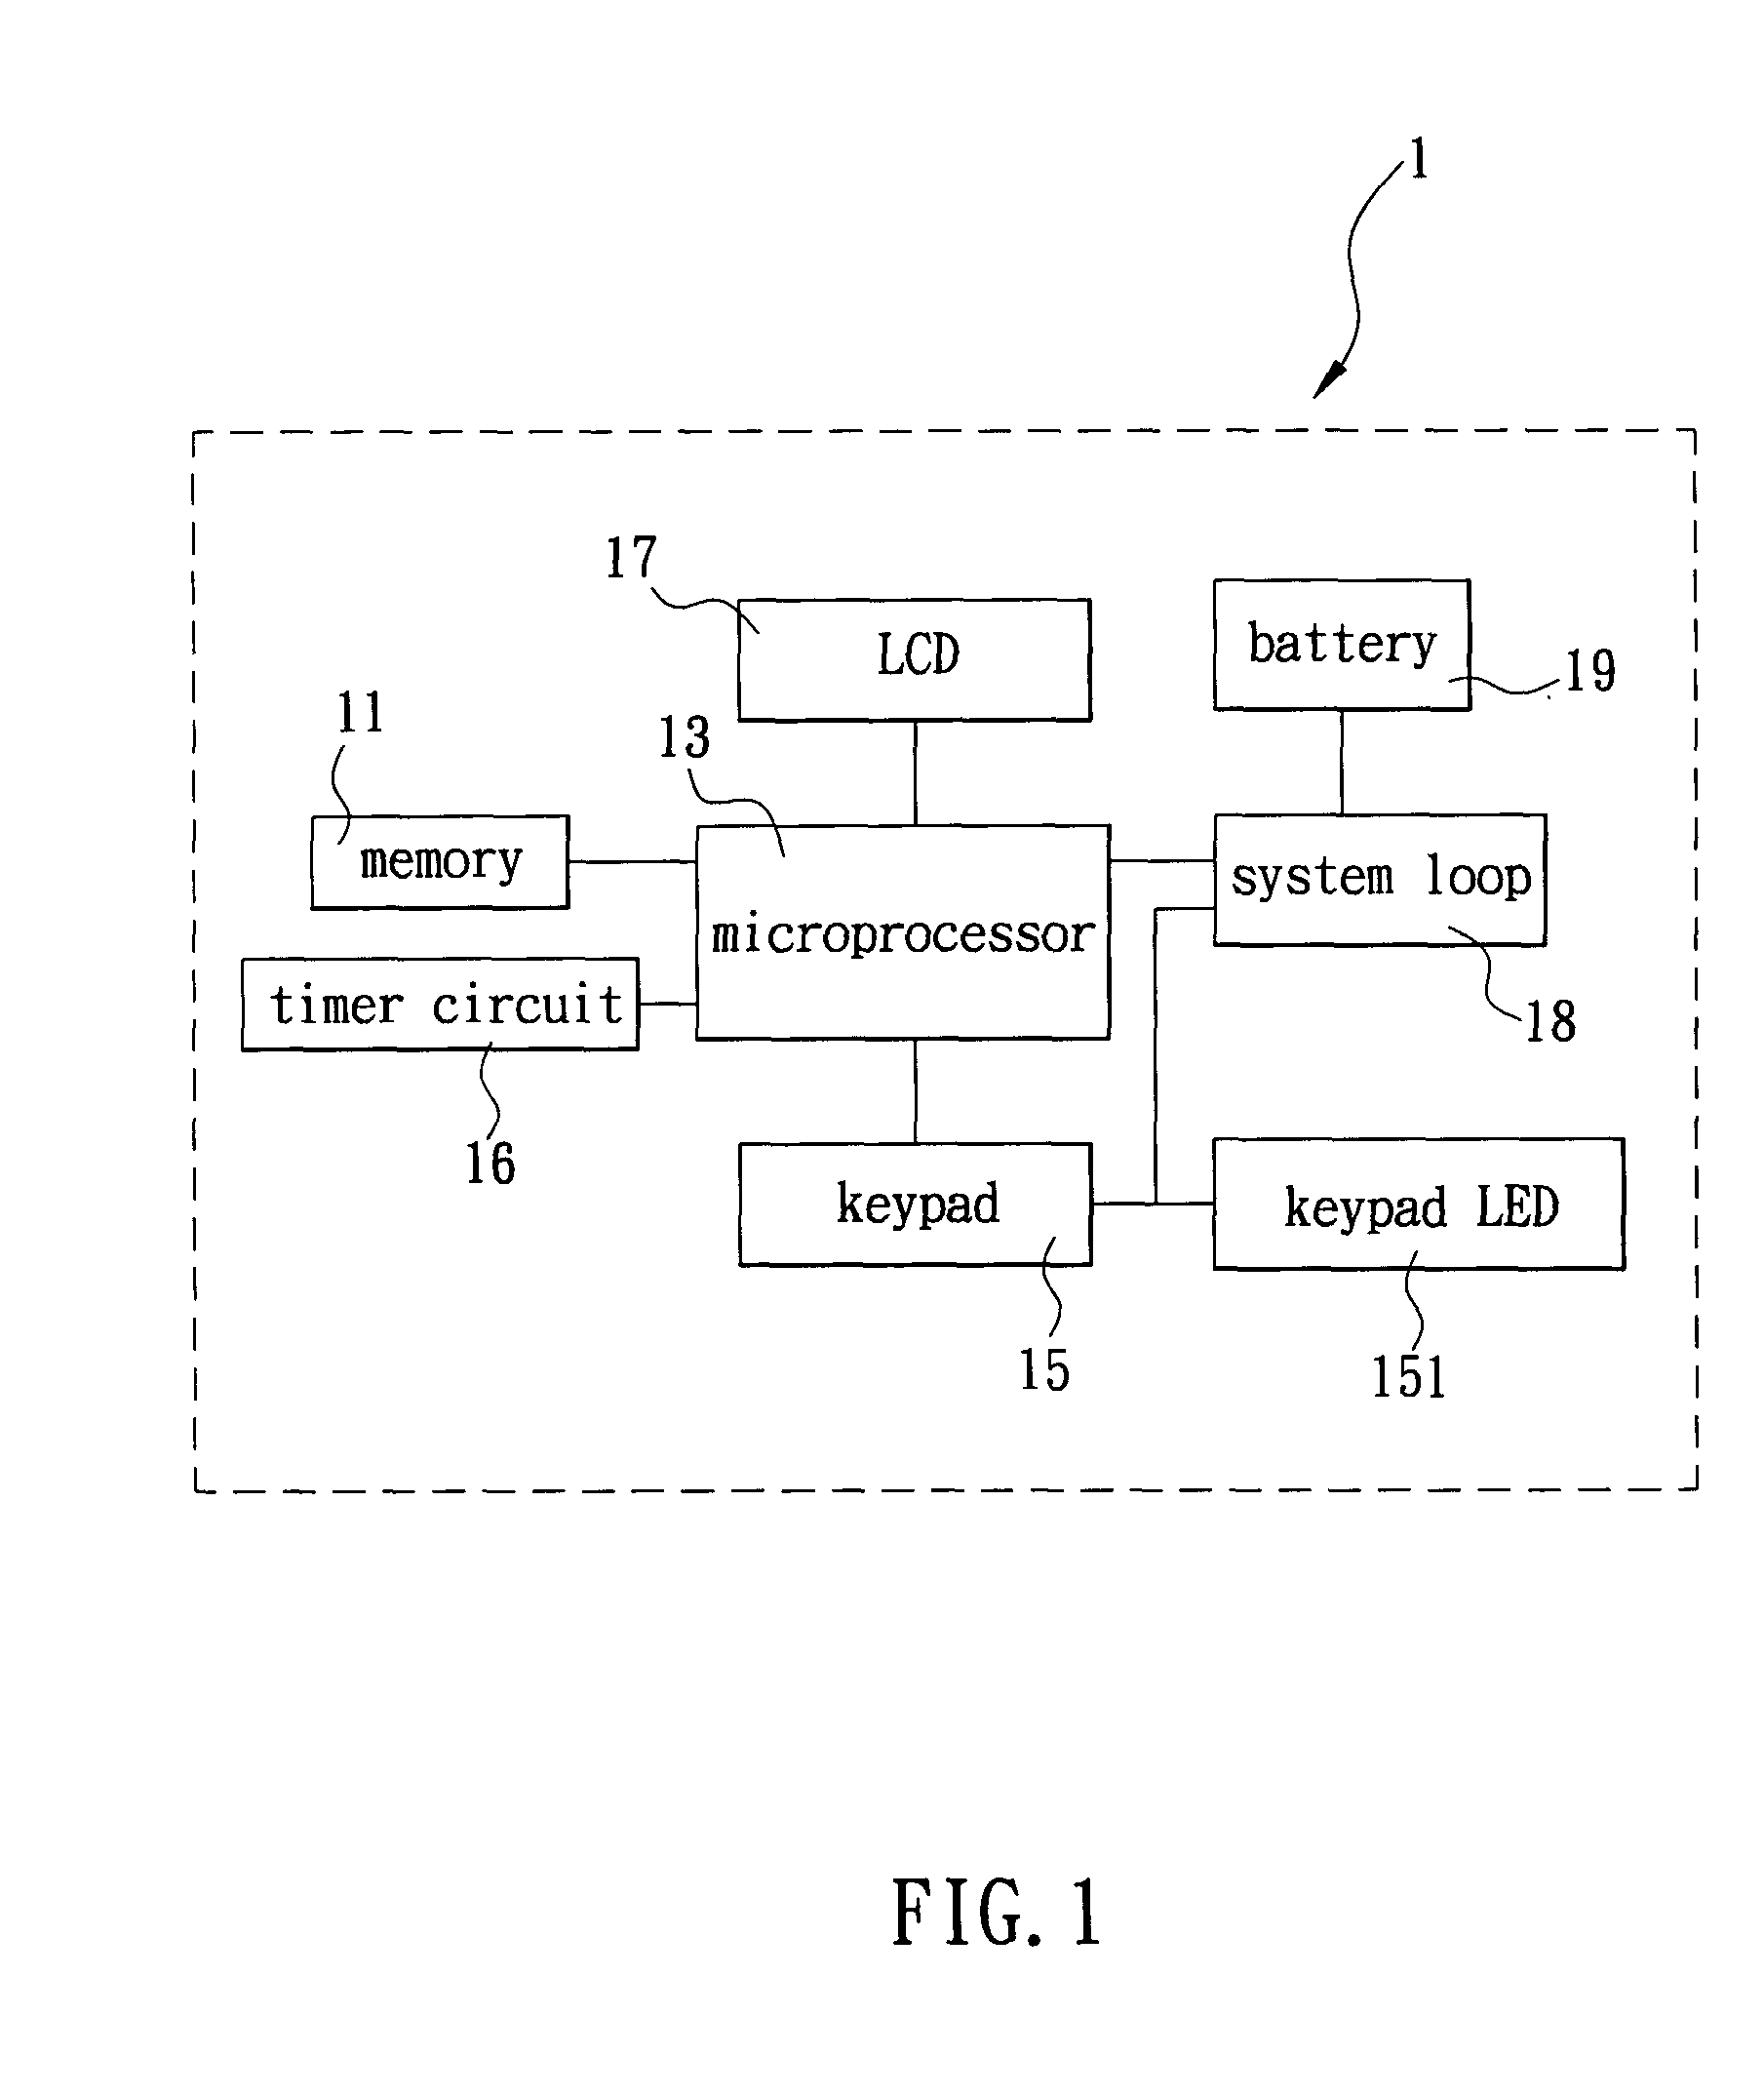 Method of automatically enabling or disabling backlight of electronic device based on a predetermined time